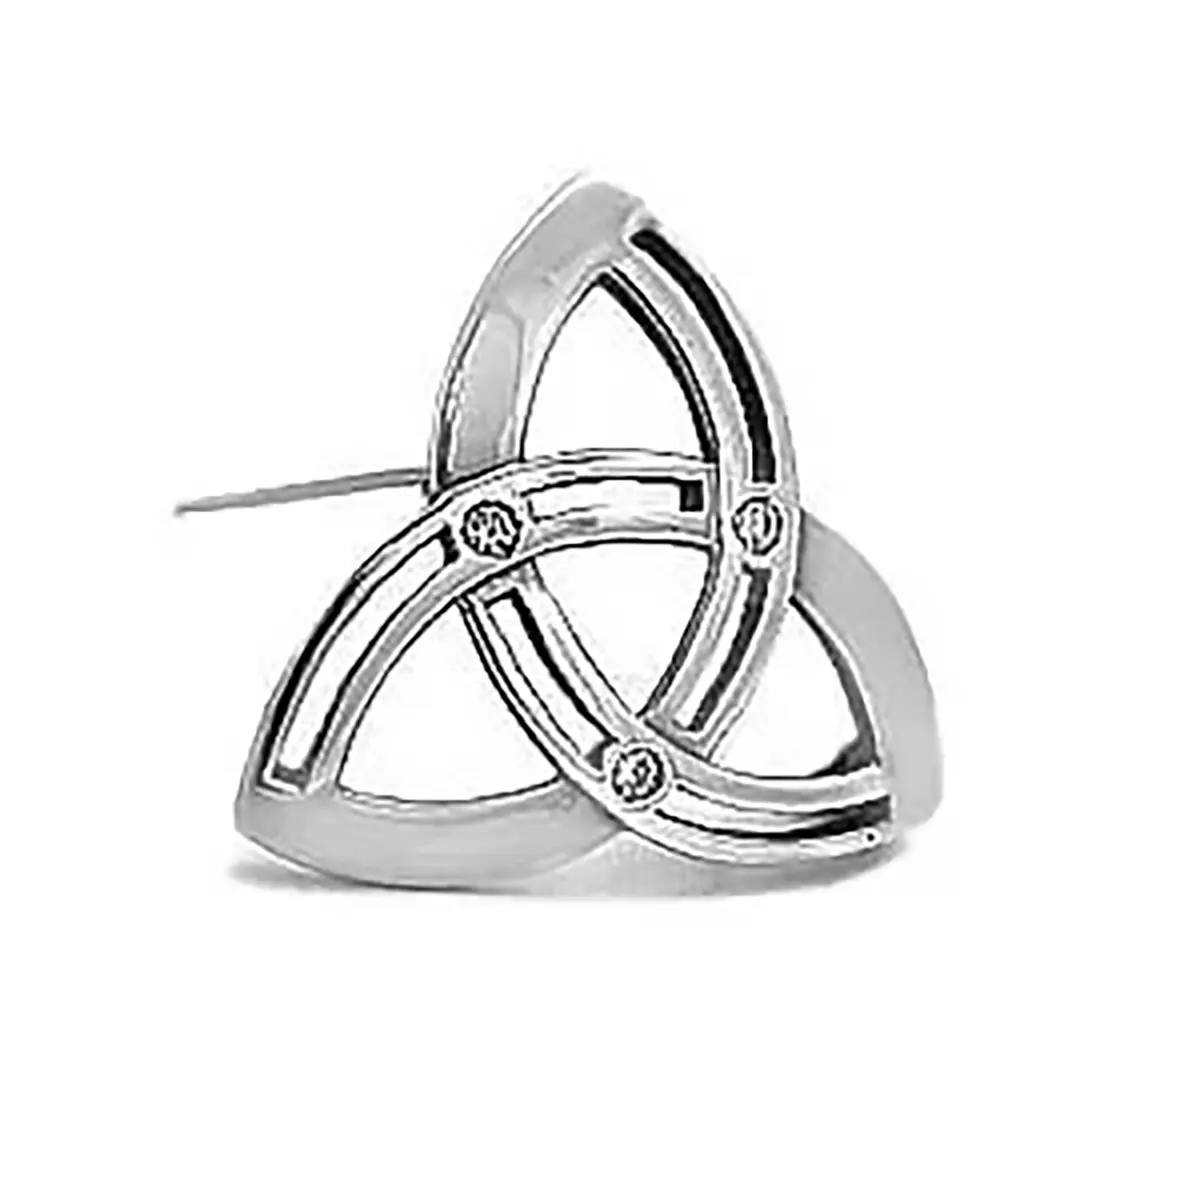 White Gold Trinity Knot Brooch...